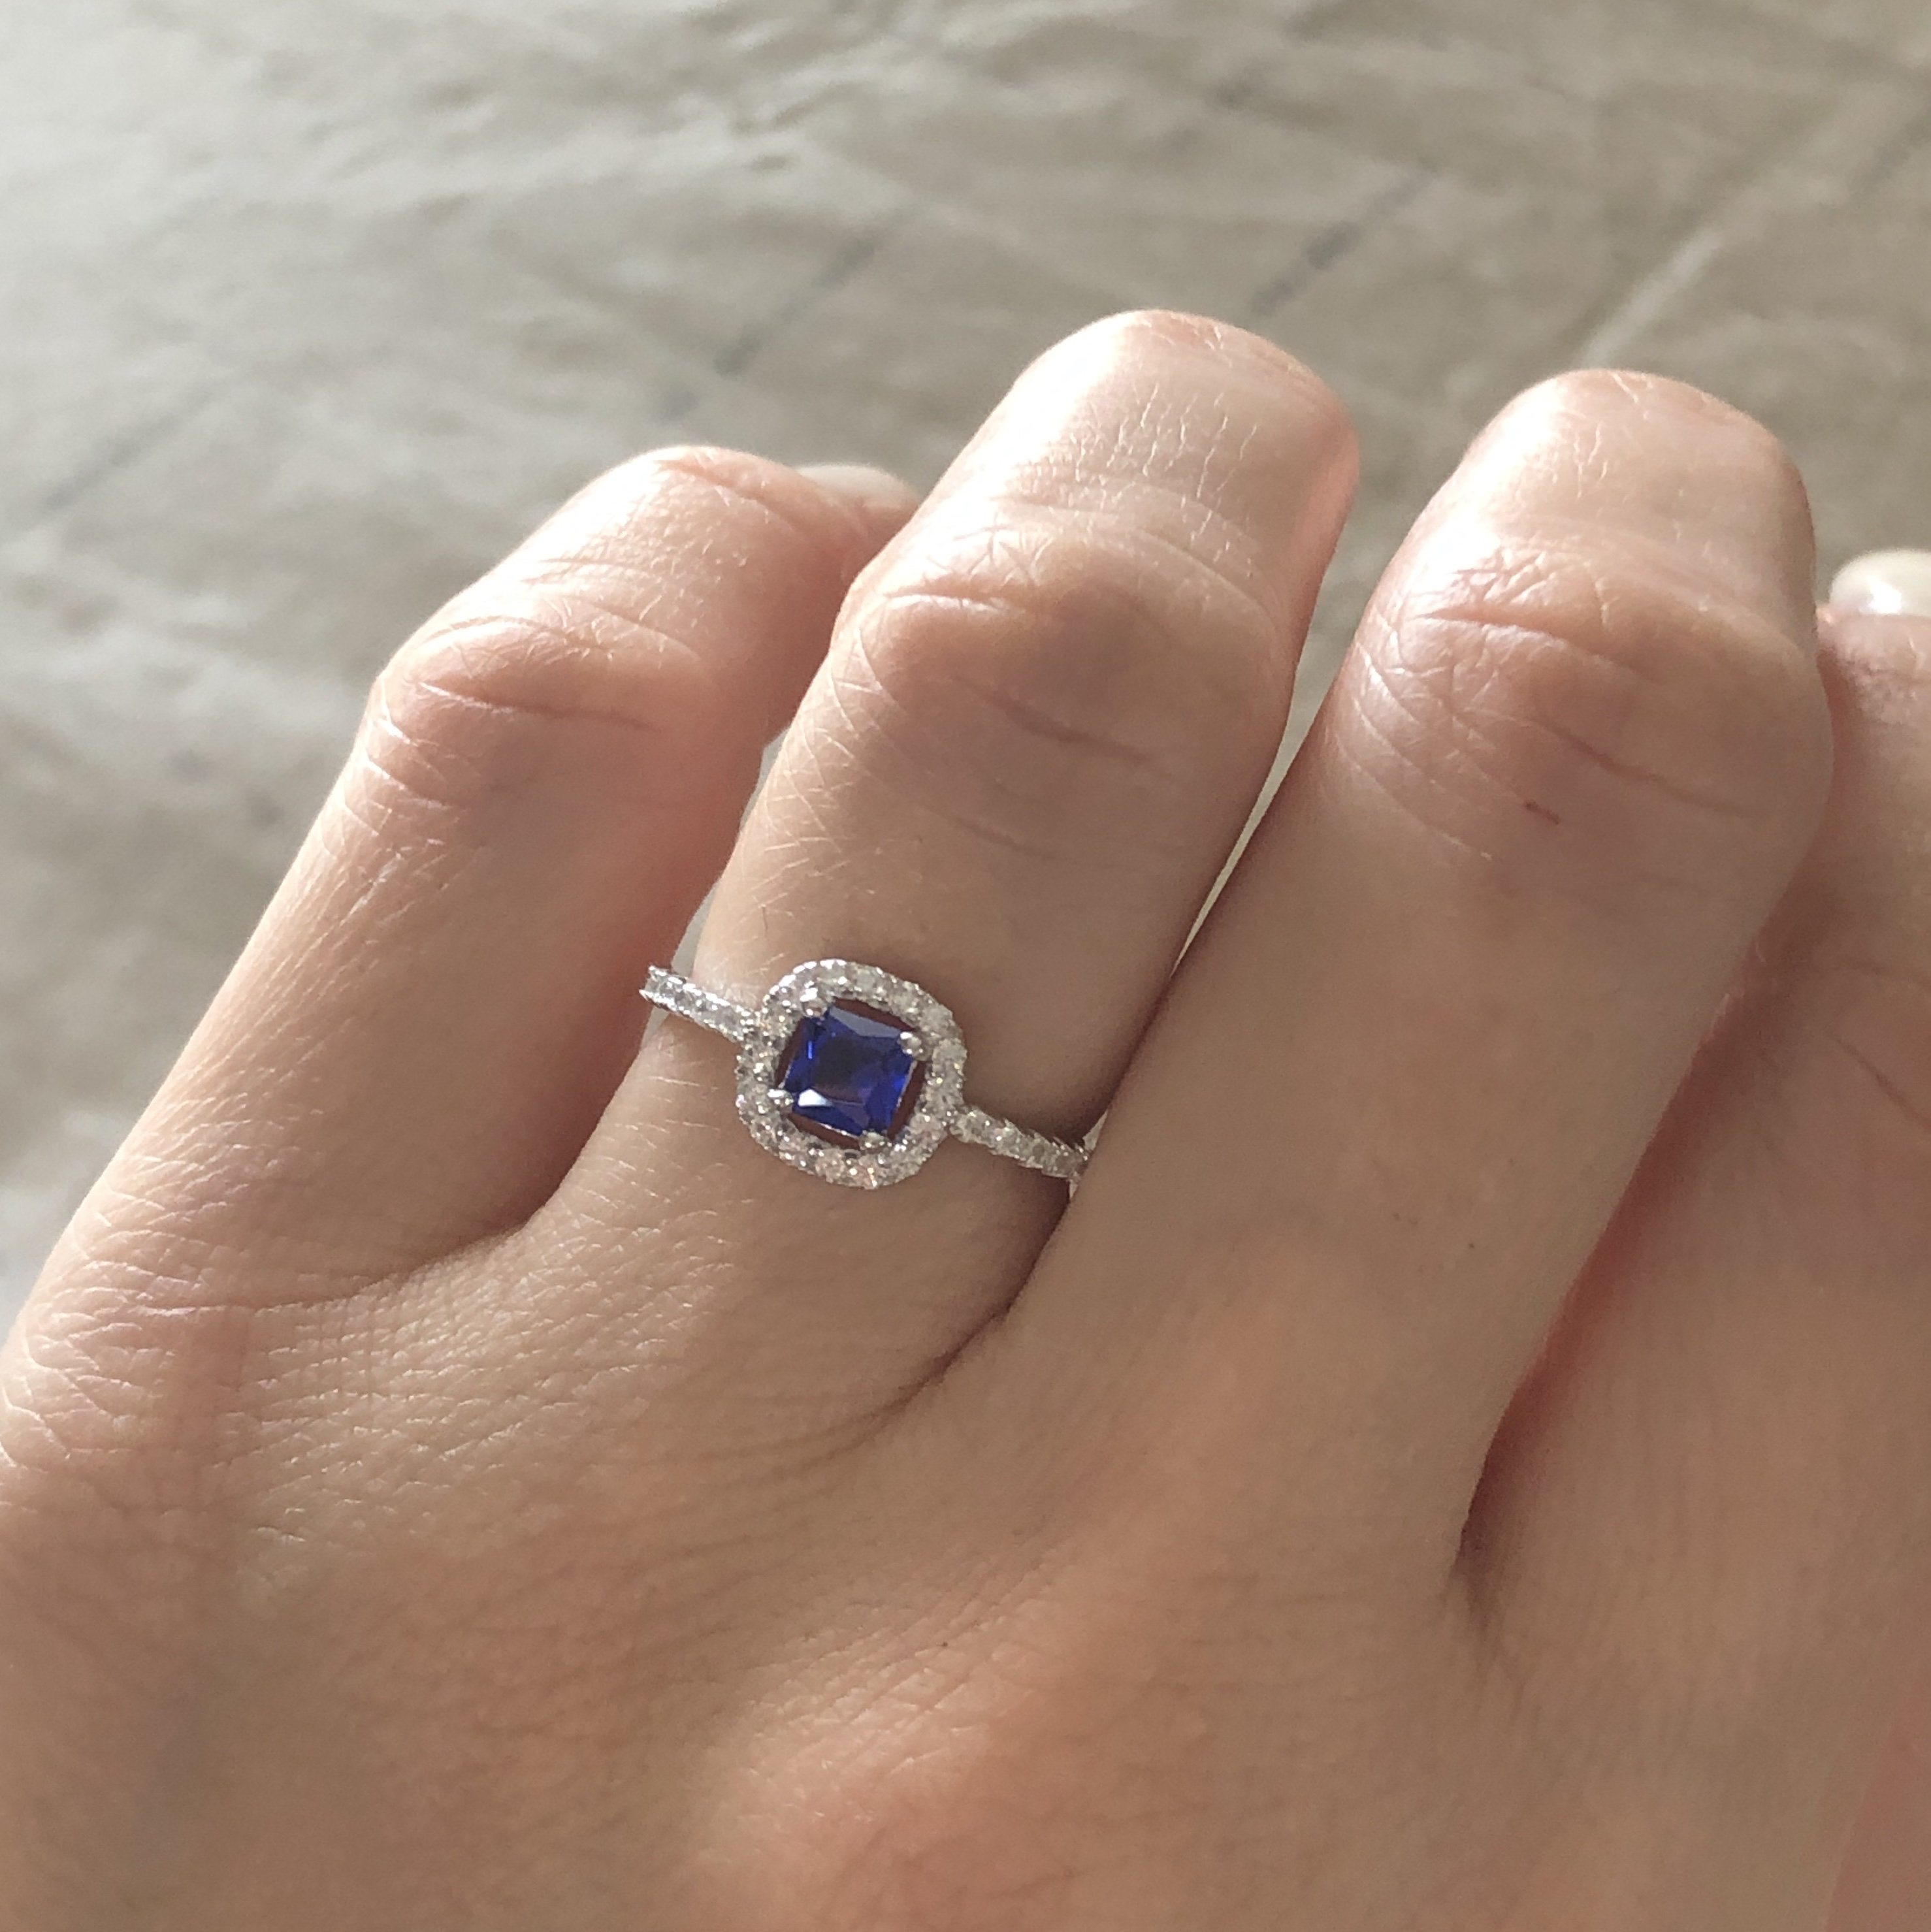 Details about   Sterling Silver 925 Elevated Blue Sapphire CZ Halo Square Link Cocktail Ring 7